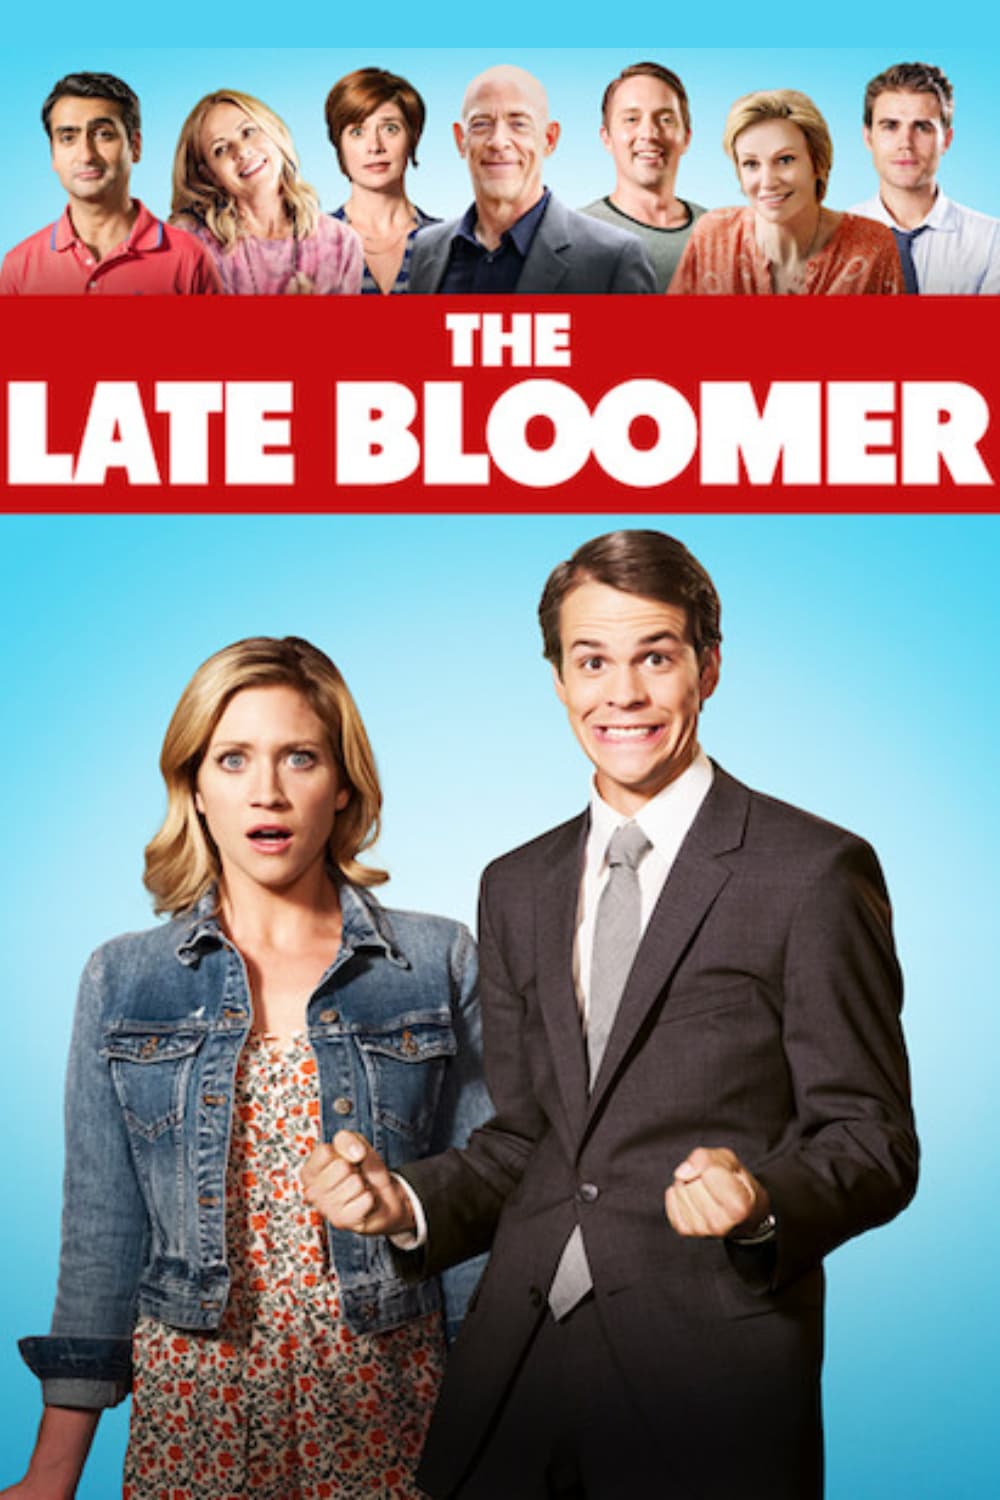 The Late Bloomer (2016)